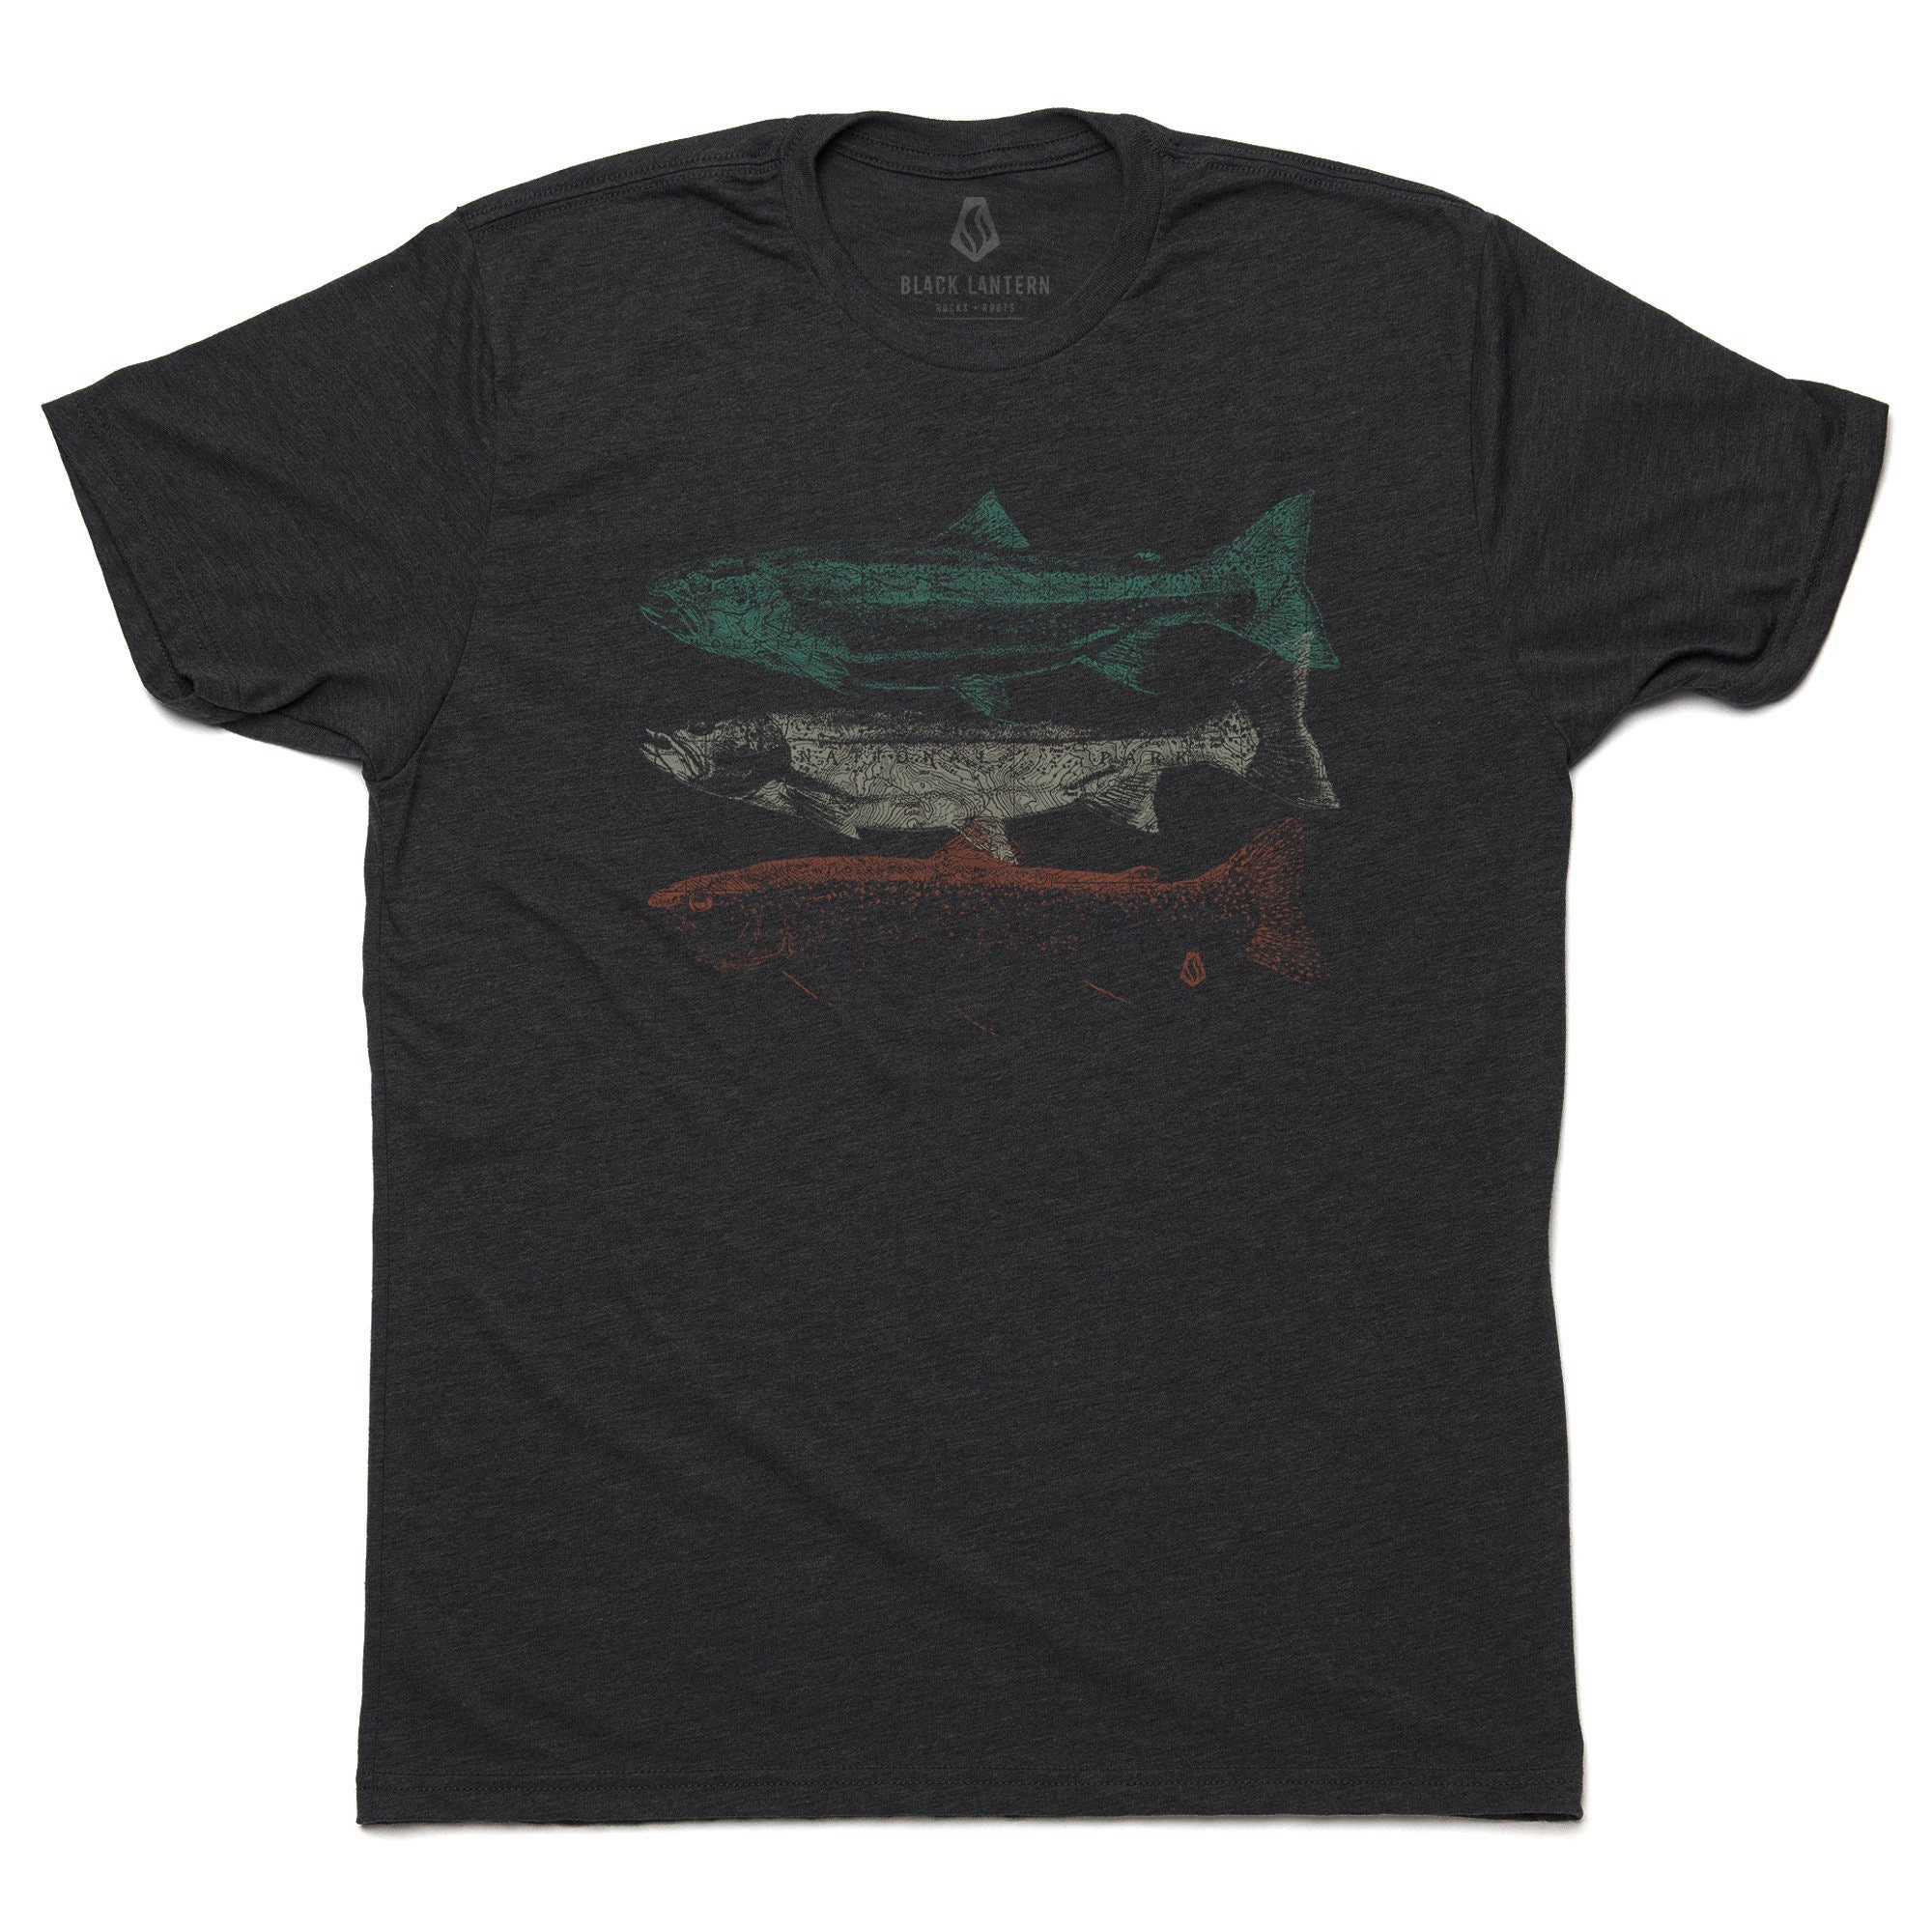 Fishing T Shirt Men - Topographic Trout - Fly Fishing Gifts for Men - Fishing Tshirt - Trout Shirt